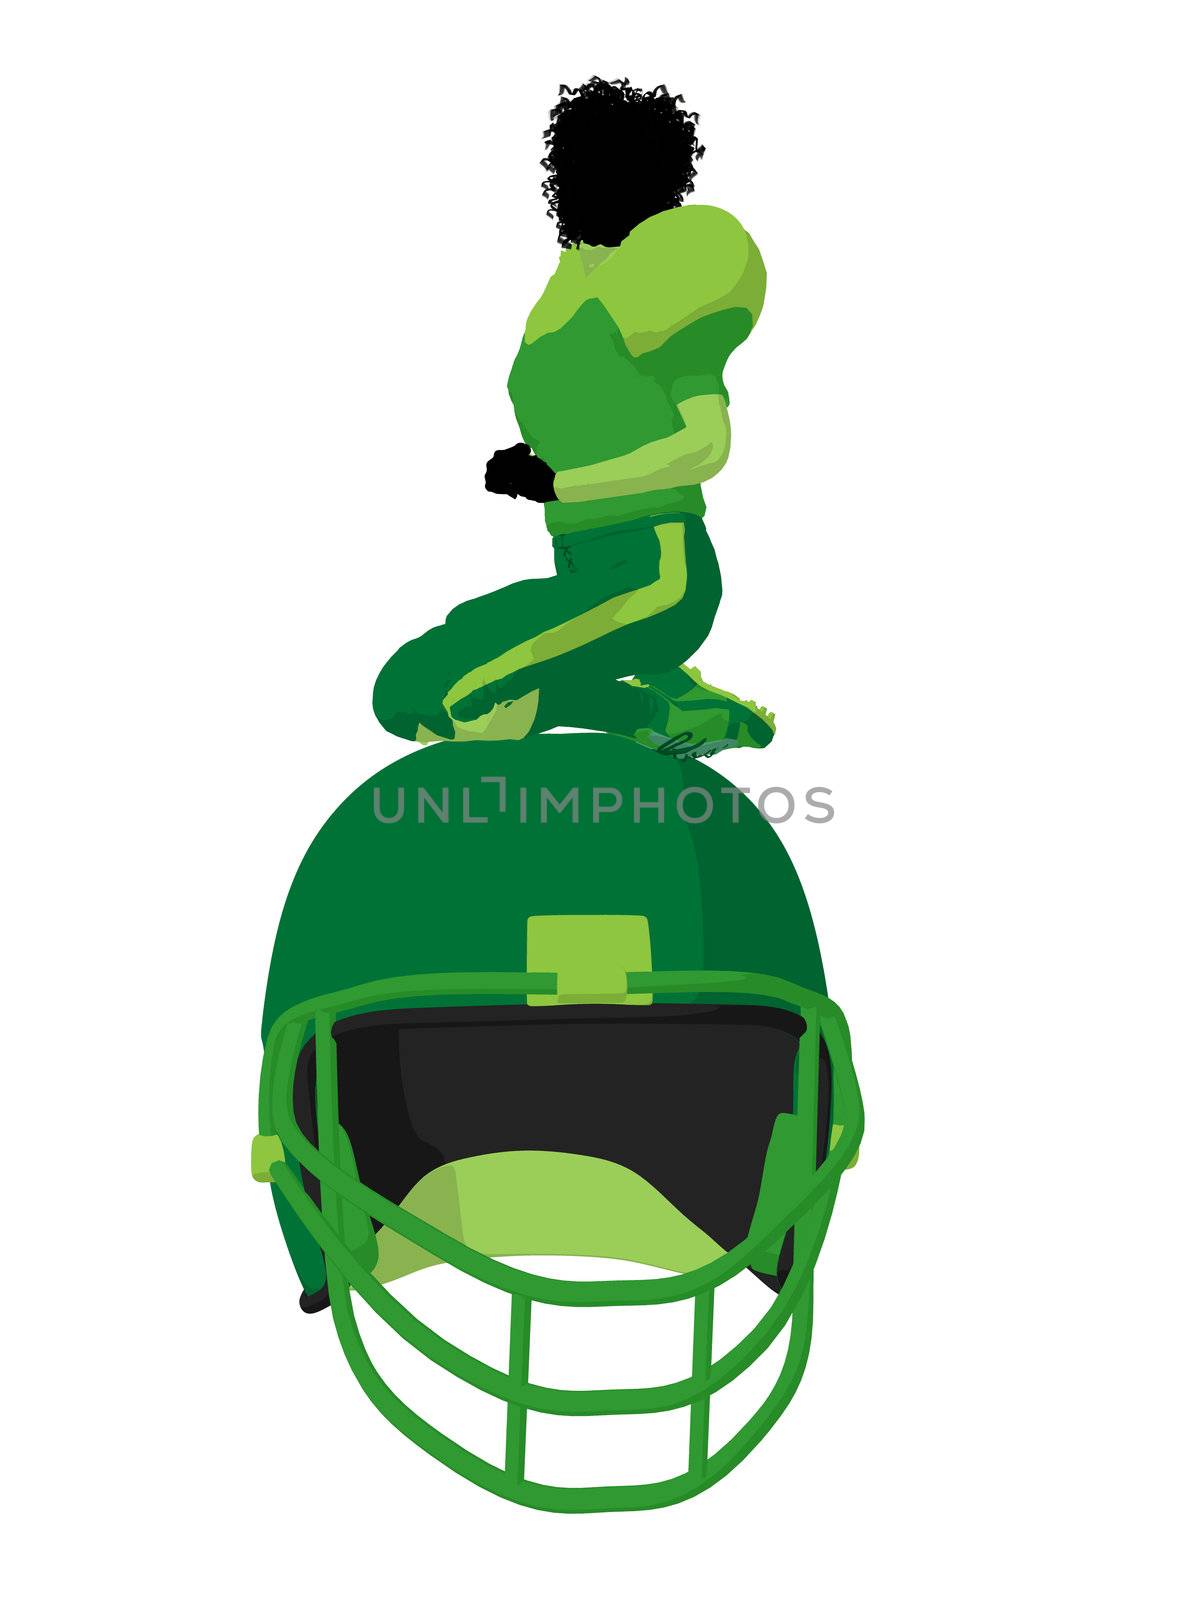 African American Female Football Player Illustration Silhouette by kathygold